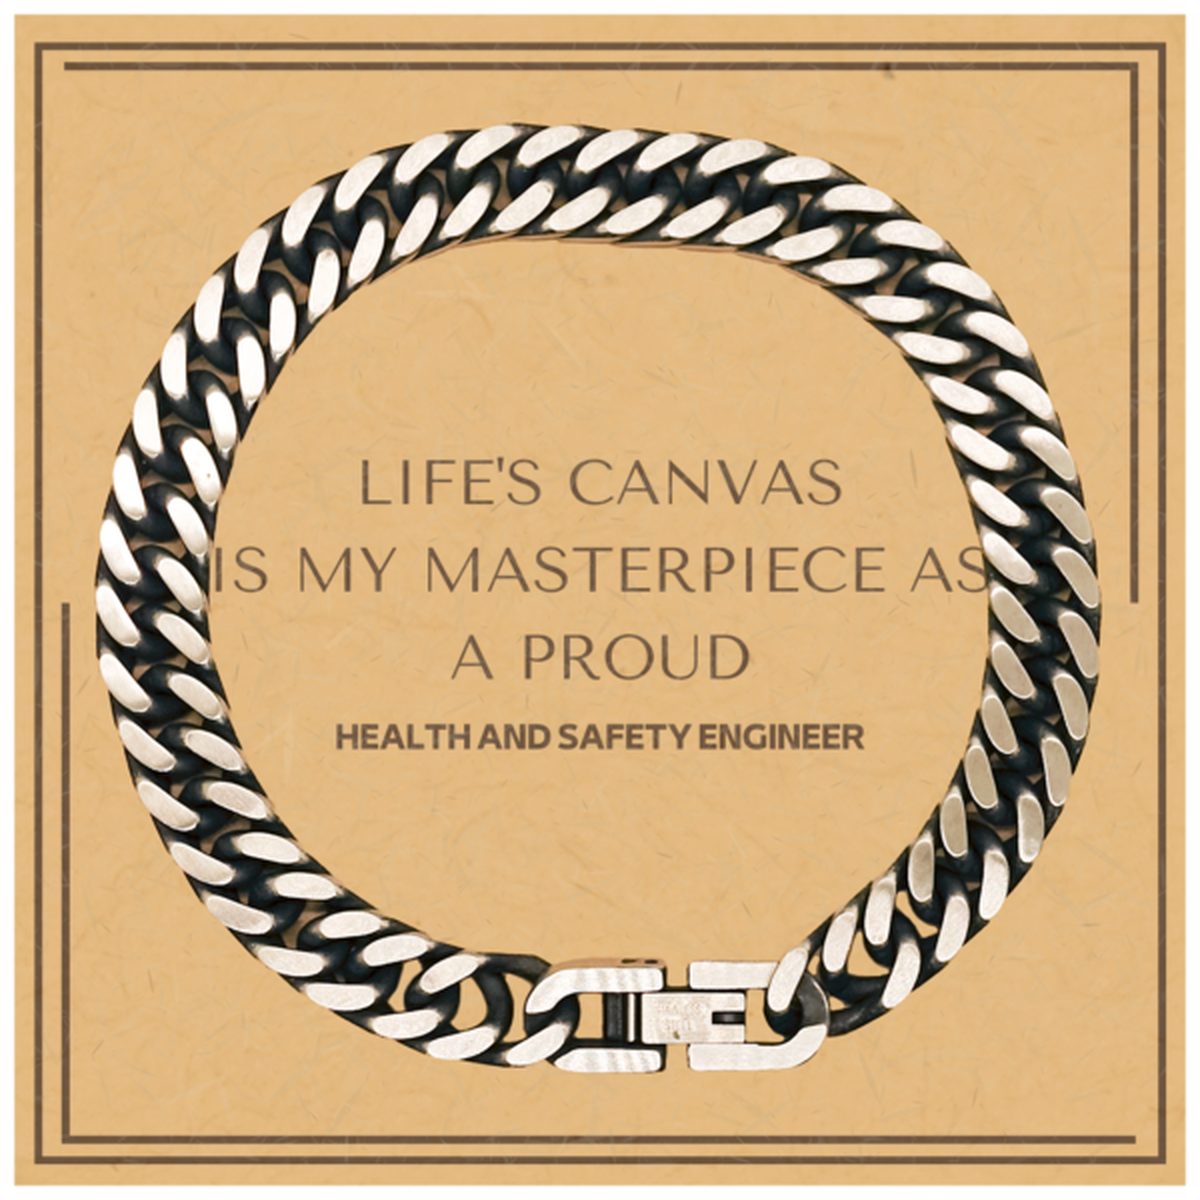 Proud Health and Safety Engineer Gifts, Life's canvas is my masterpiece, Epic Birthday Christmas Unique Cuban Link Chain Bracelet For Health and Safety Engineer, Coworkers, Men, Women, Friends